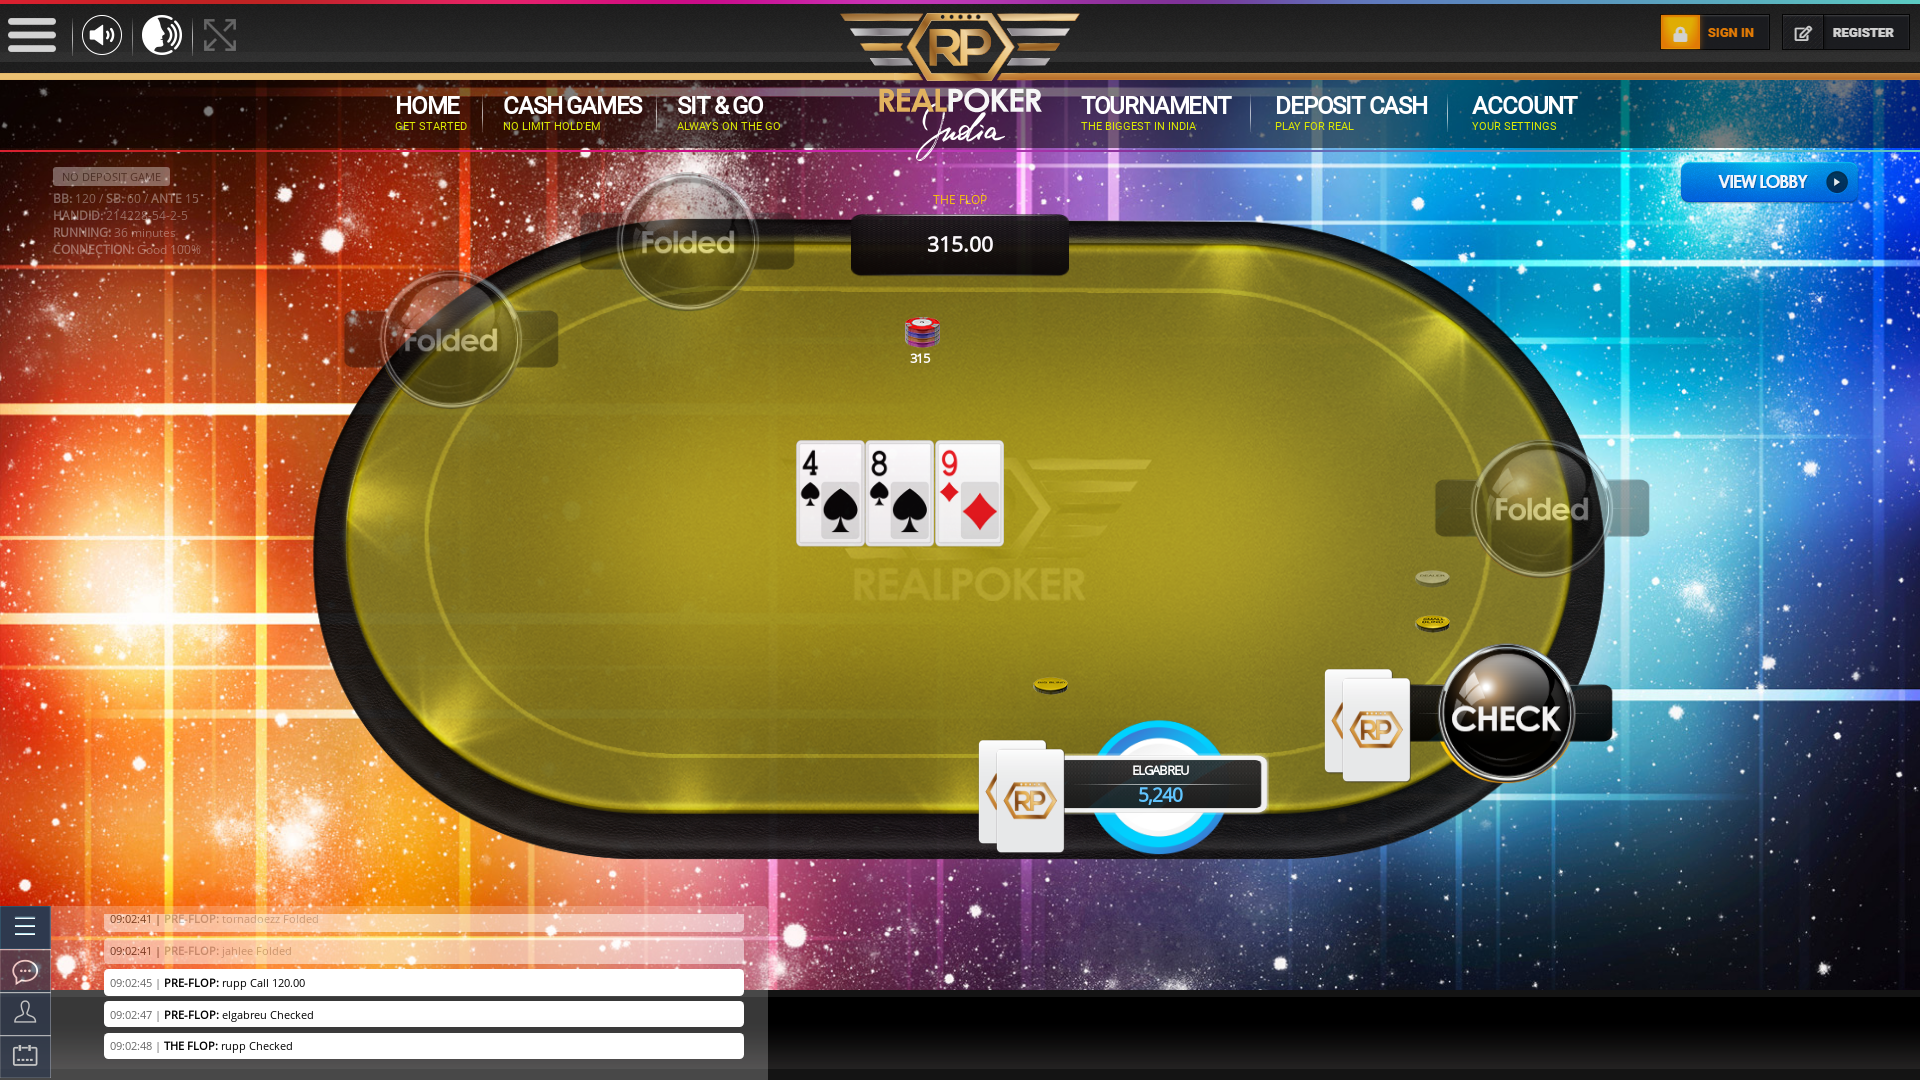 BTM Layout, Bangalore 10 player poker in the 36th minute